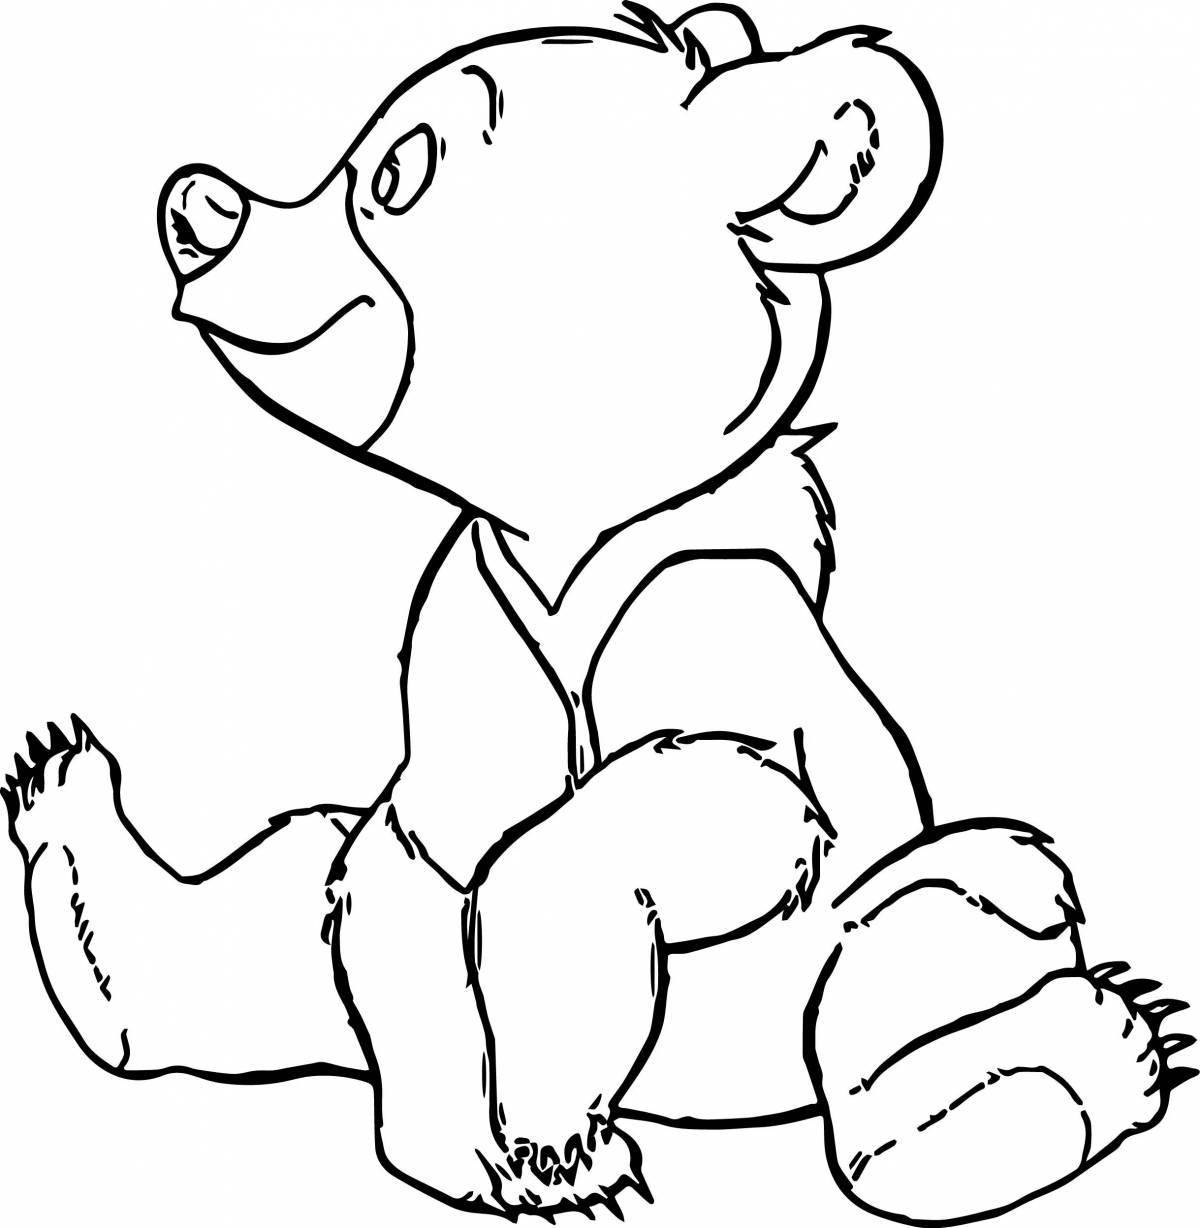 Playful bear coloring pages